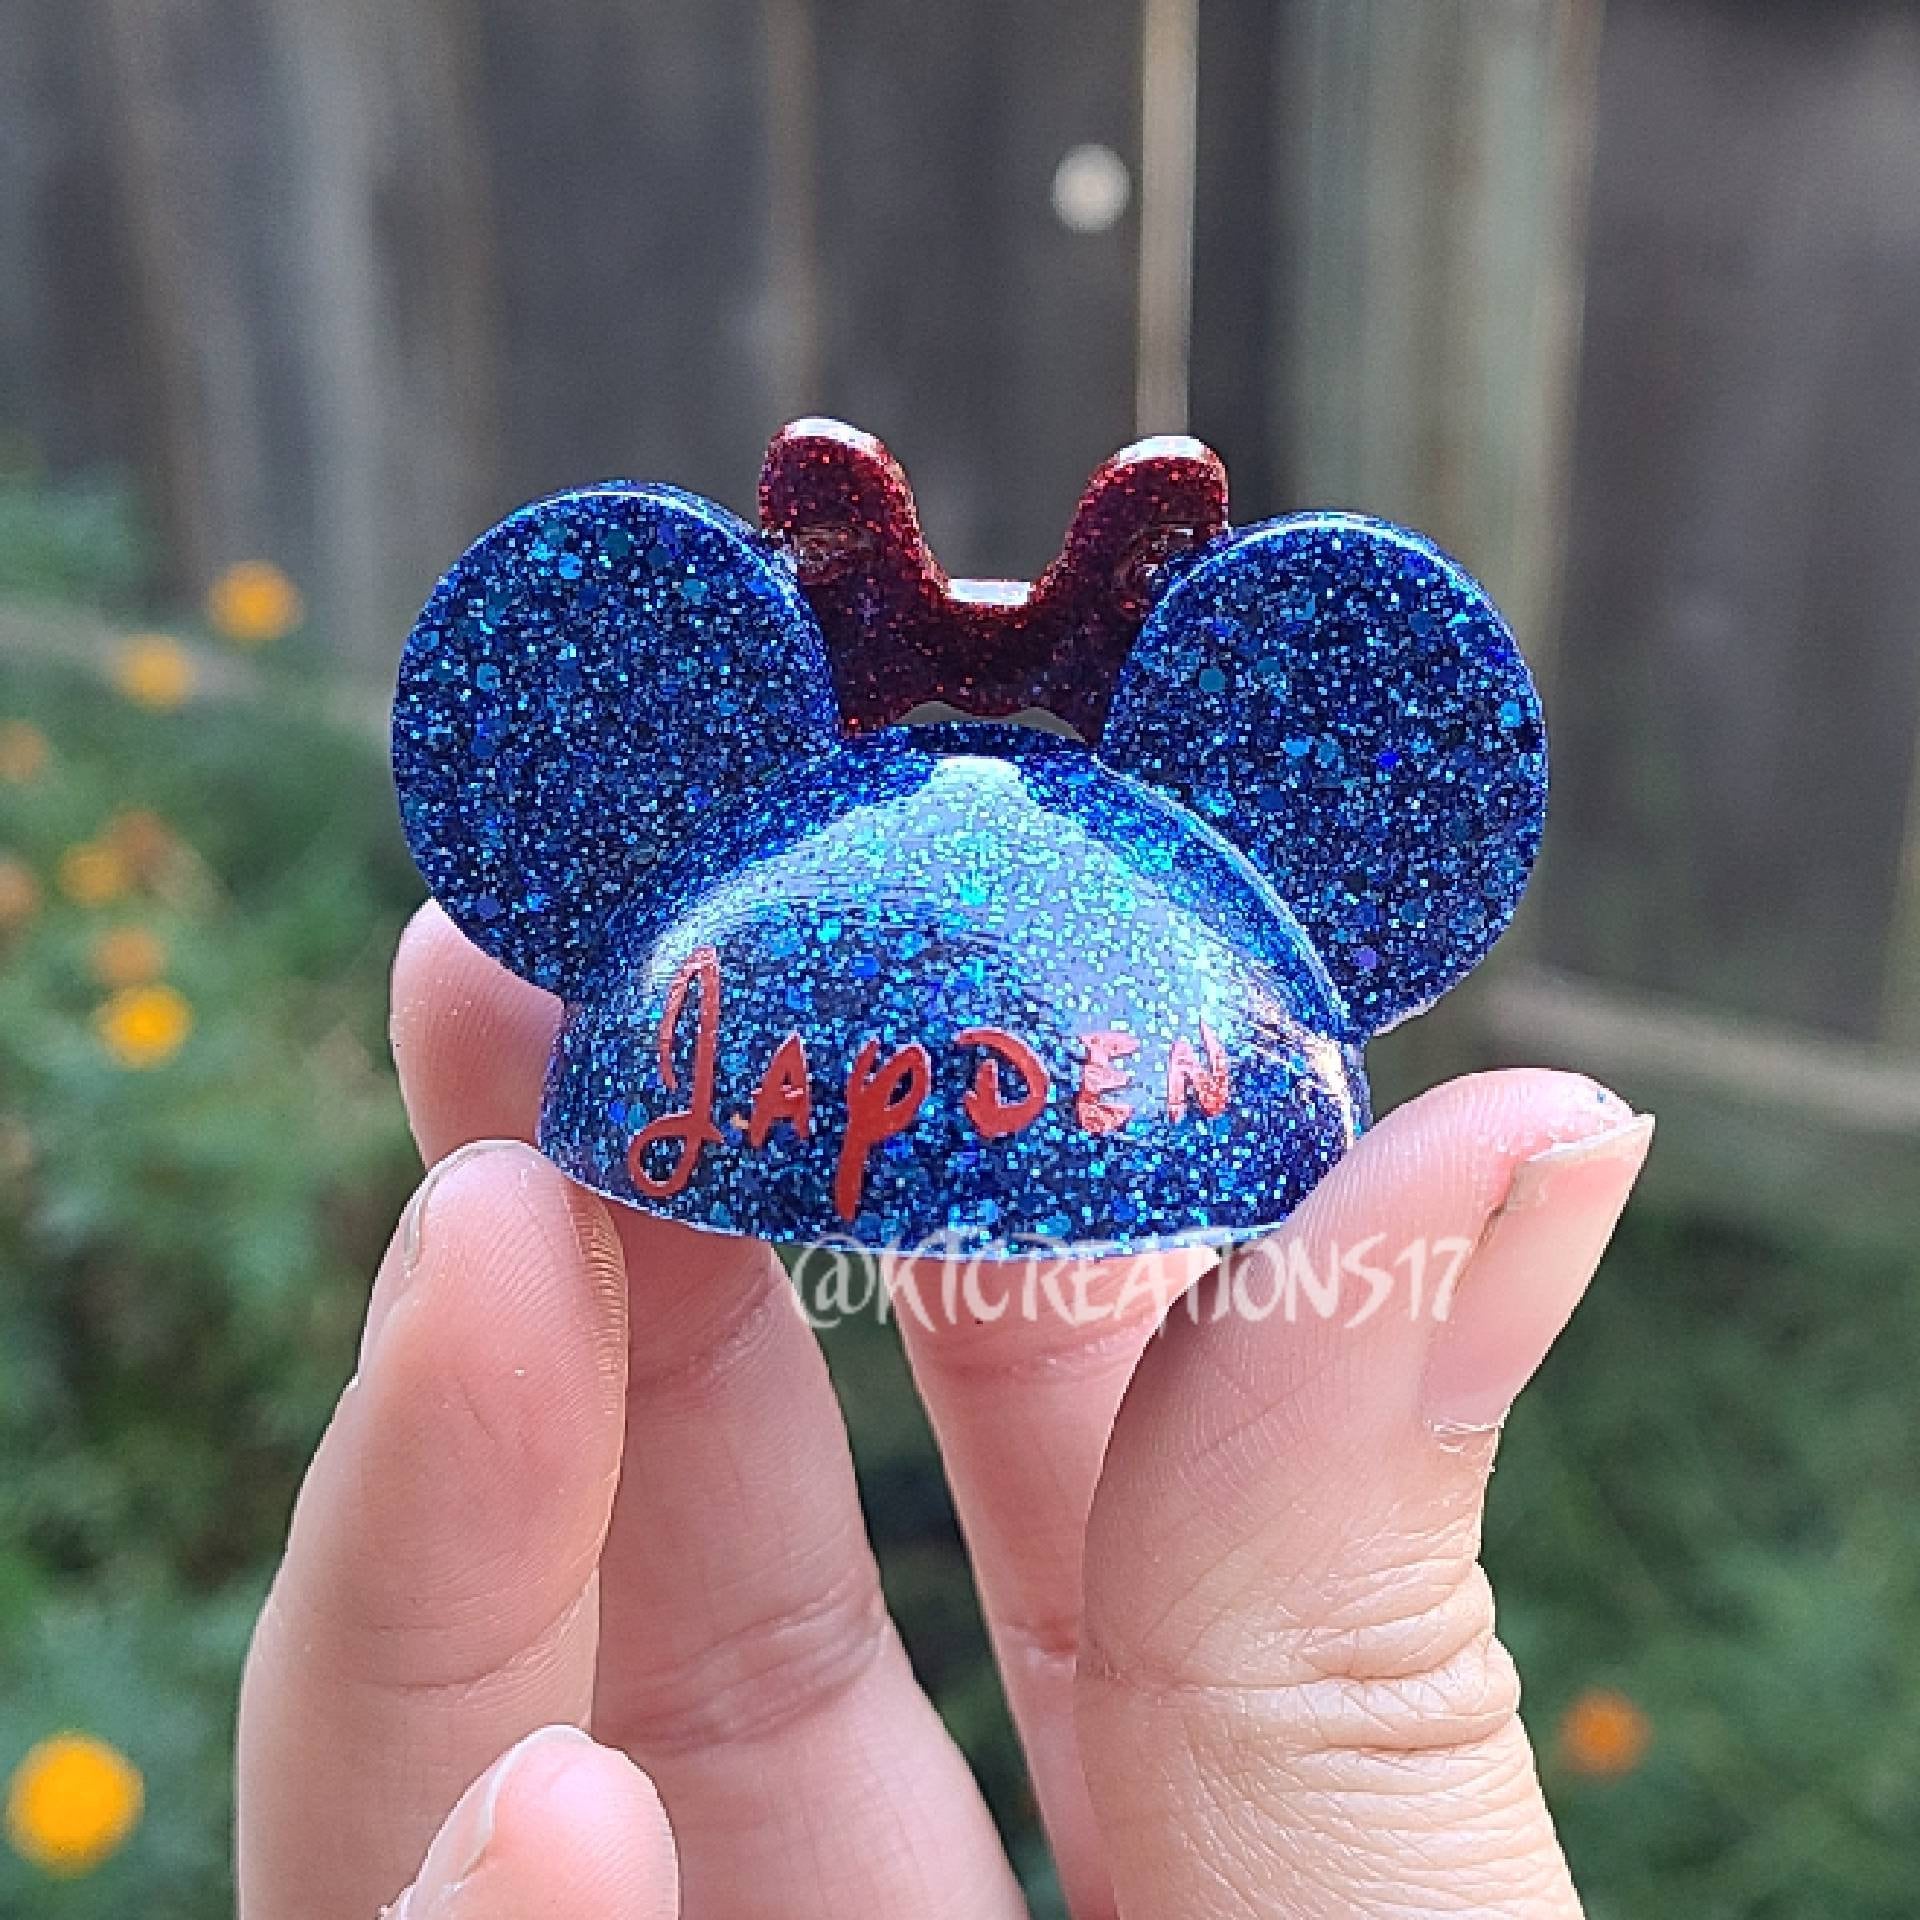 Straw toppers are now available!!! #liloandstitch #stitch #pumpkinsti